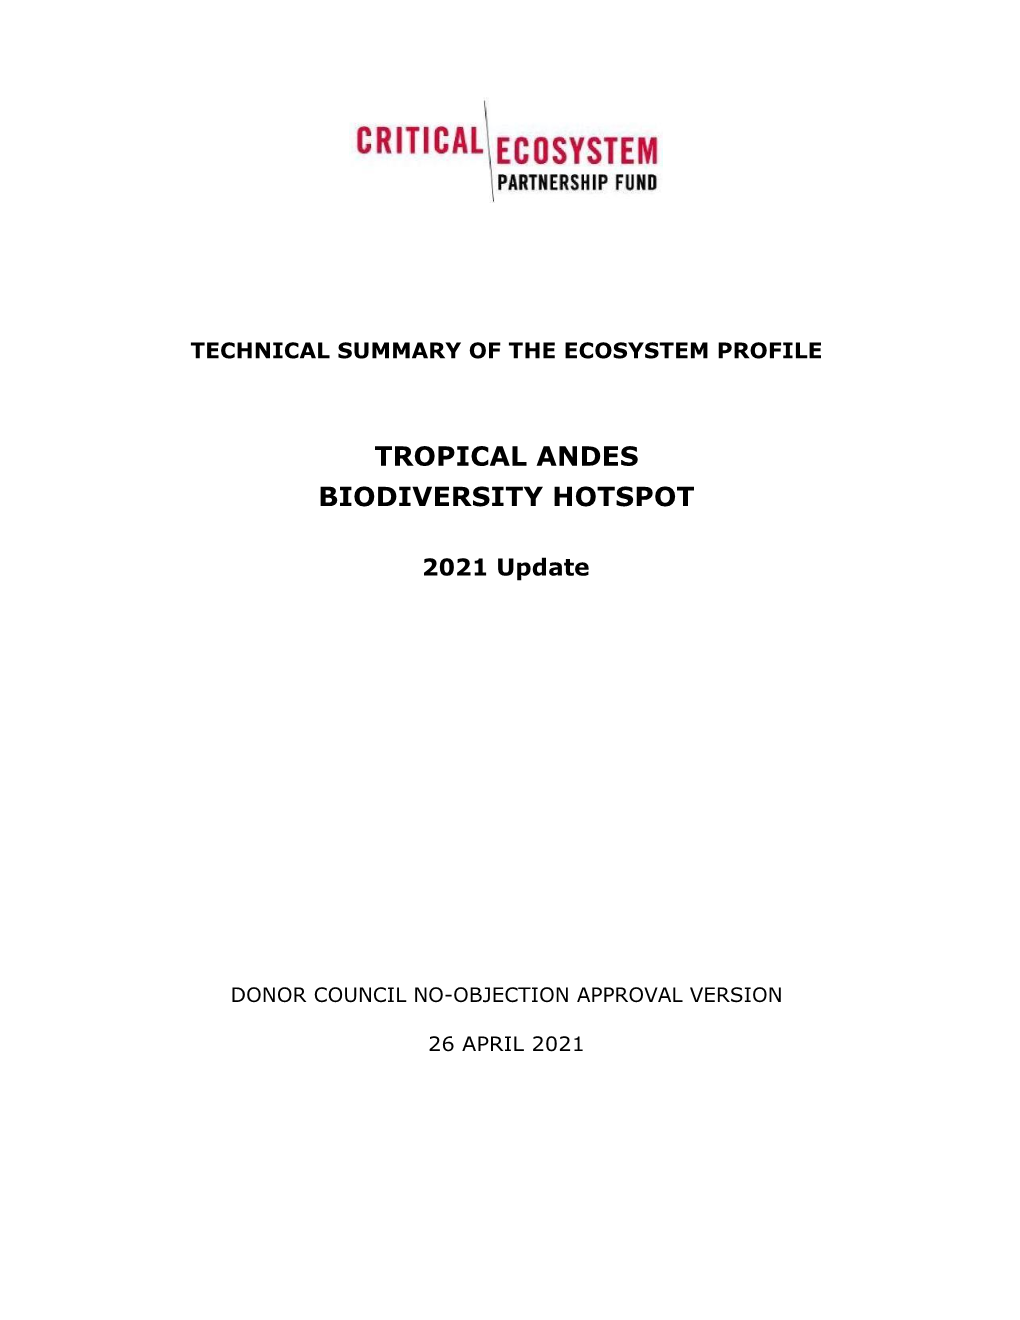 Tropical Andes Biodiversity Hotspot